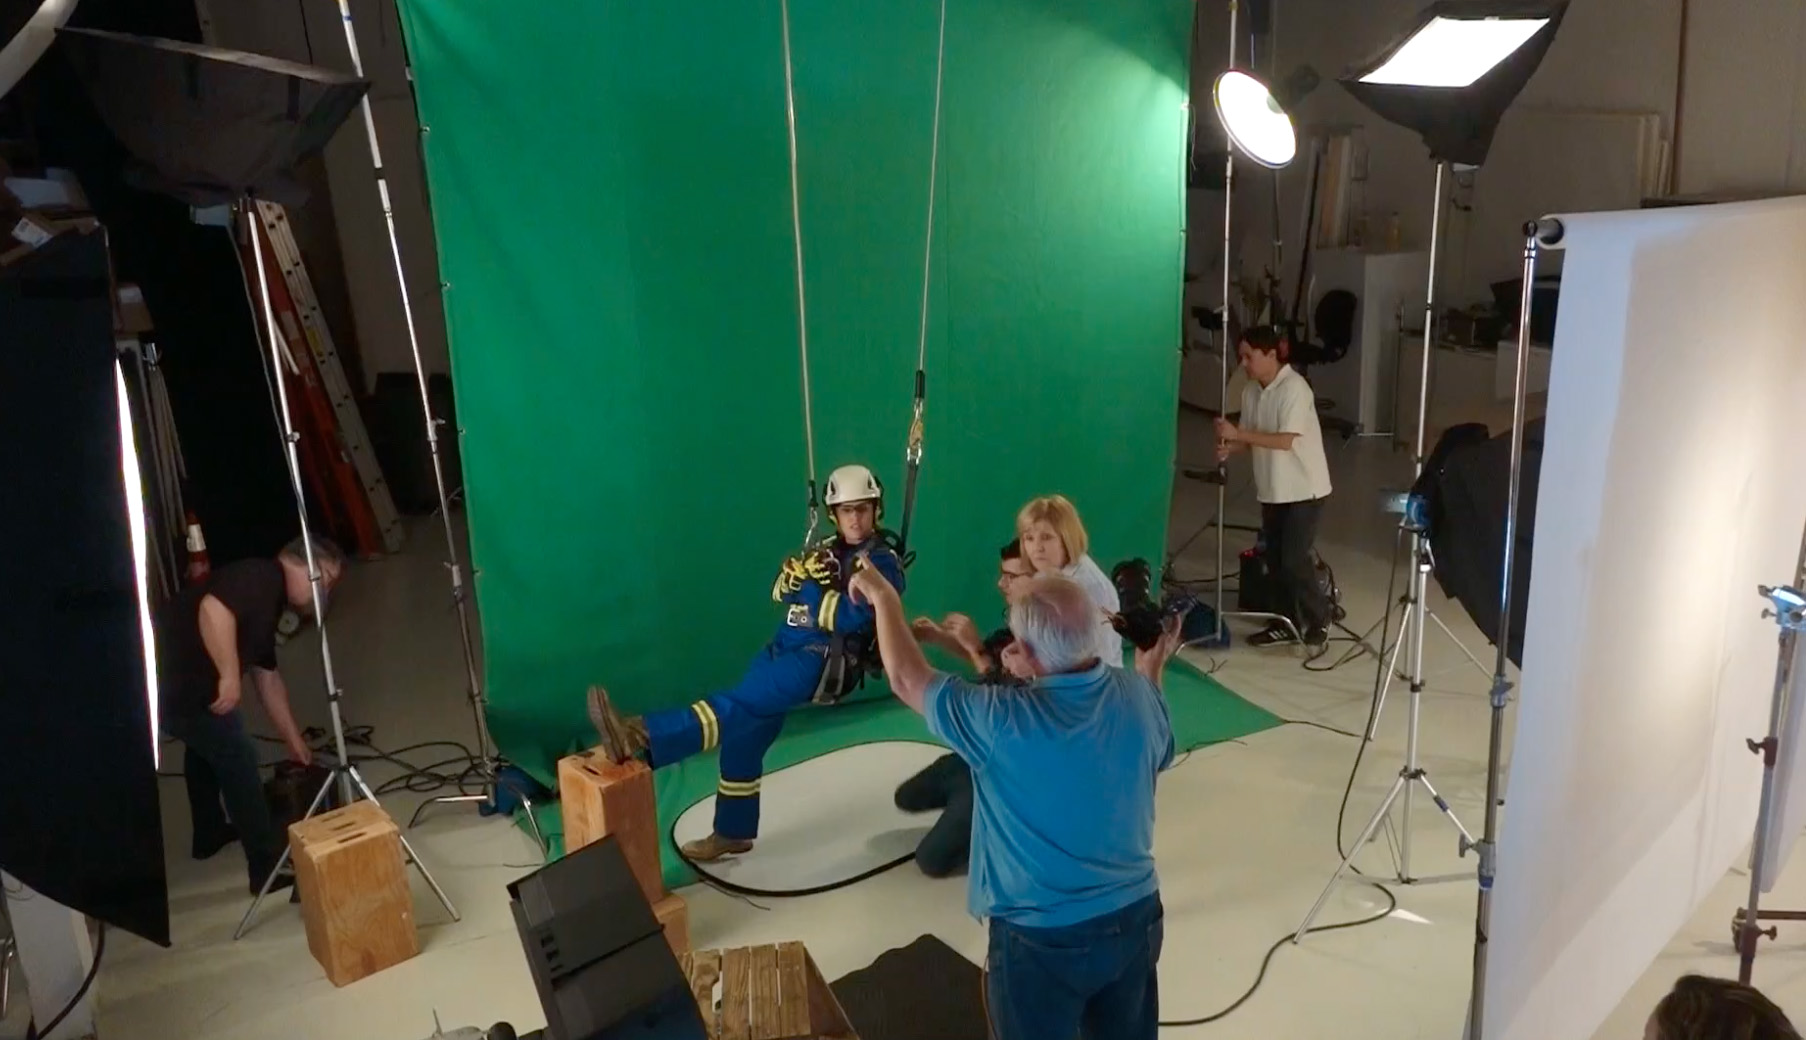 3m Personal Safety Division Shoot With Spot Createbtsgreen Screen 